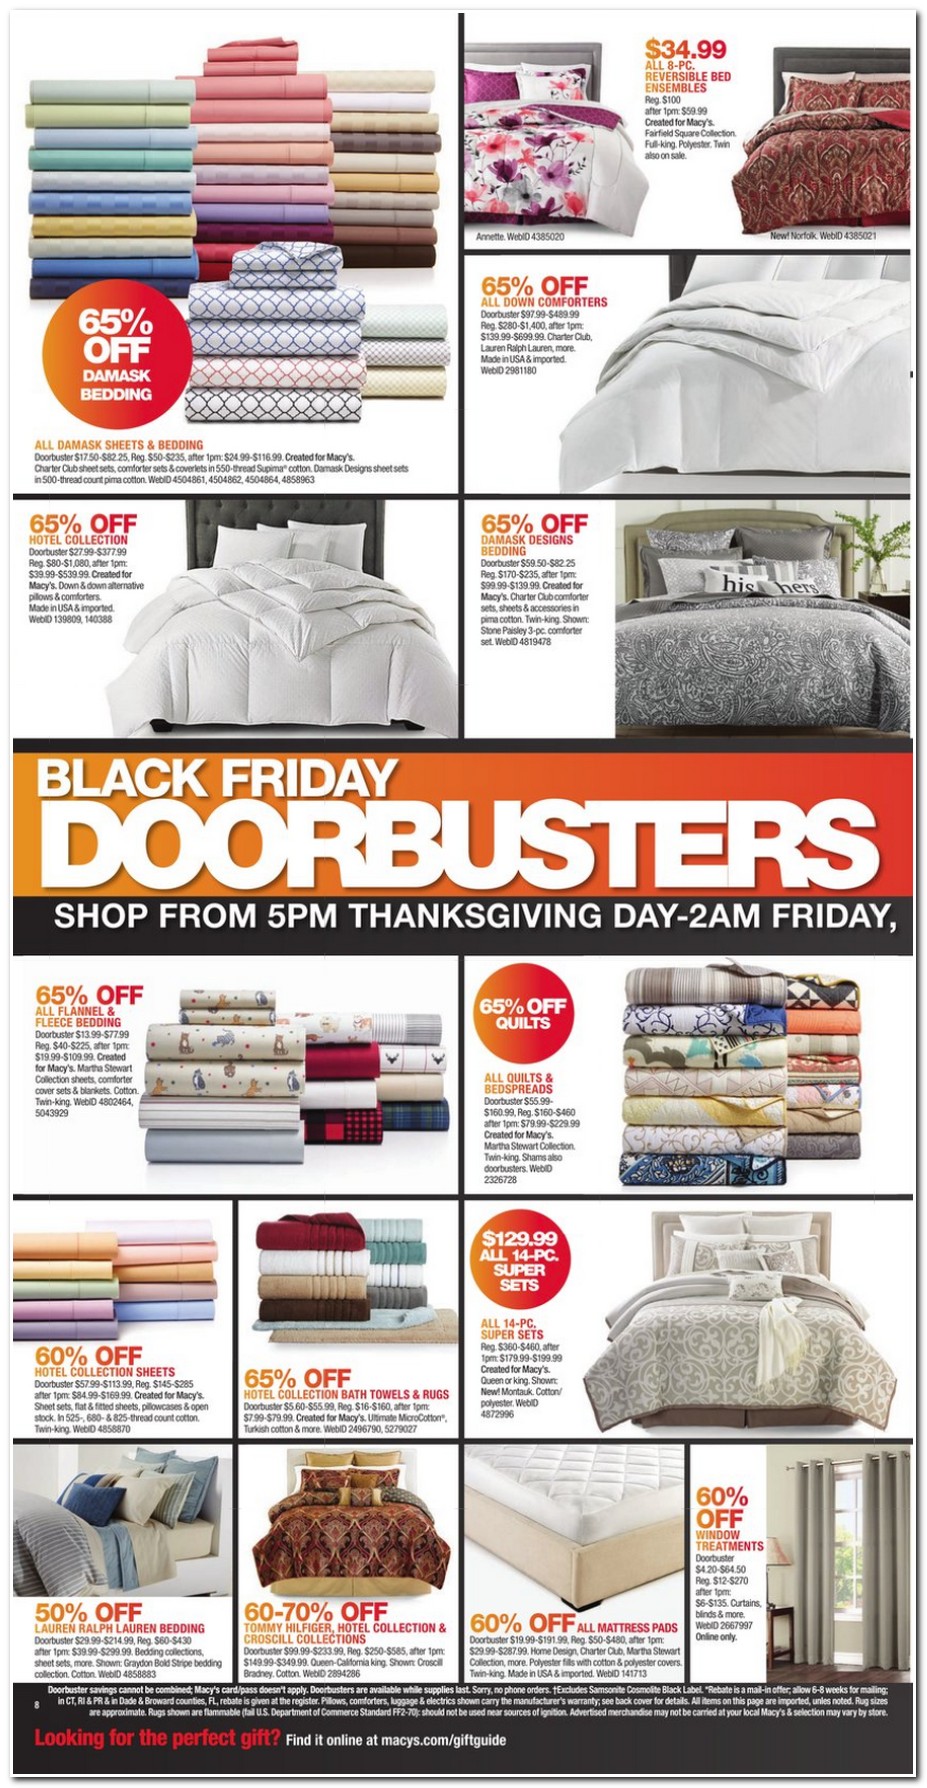 Macys Black Friday Ads, Sales, Doorbusters, and Deals 2017, Promo Codes, Deals 2018 - CouponShy